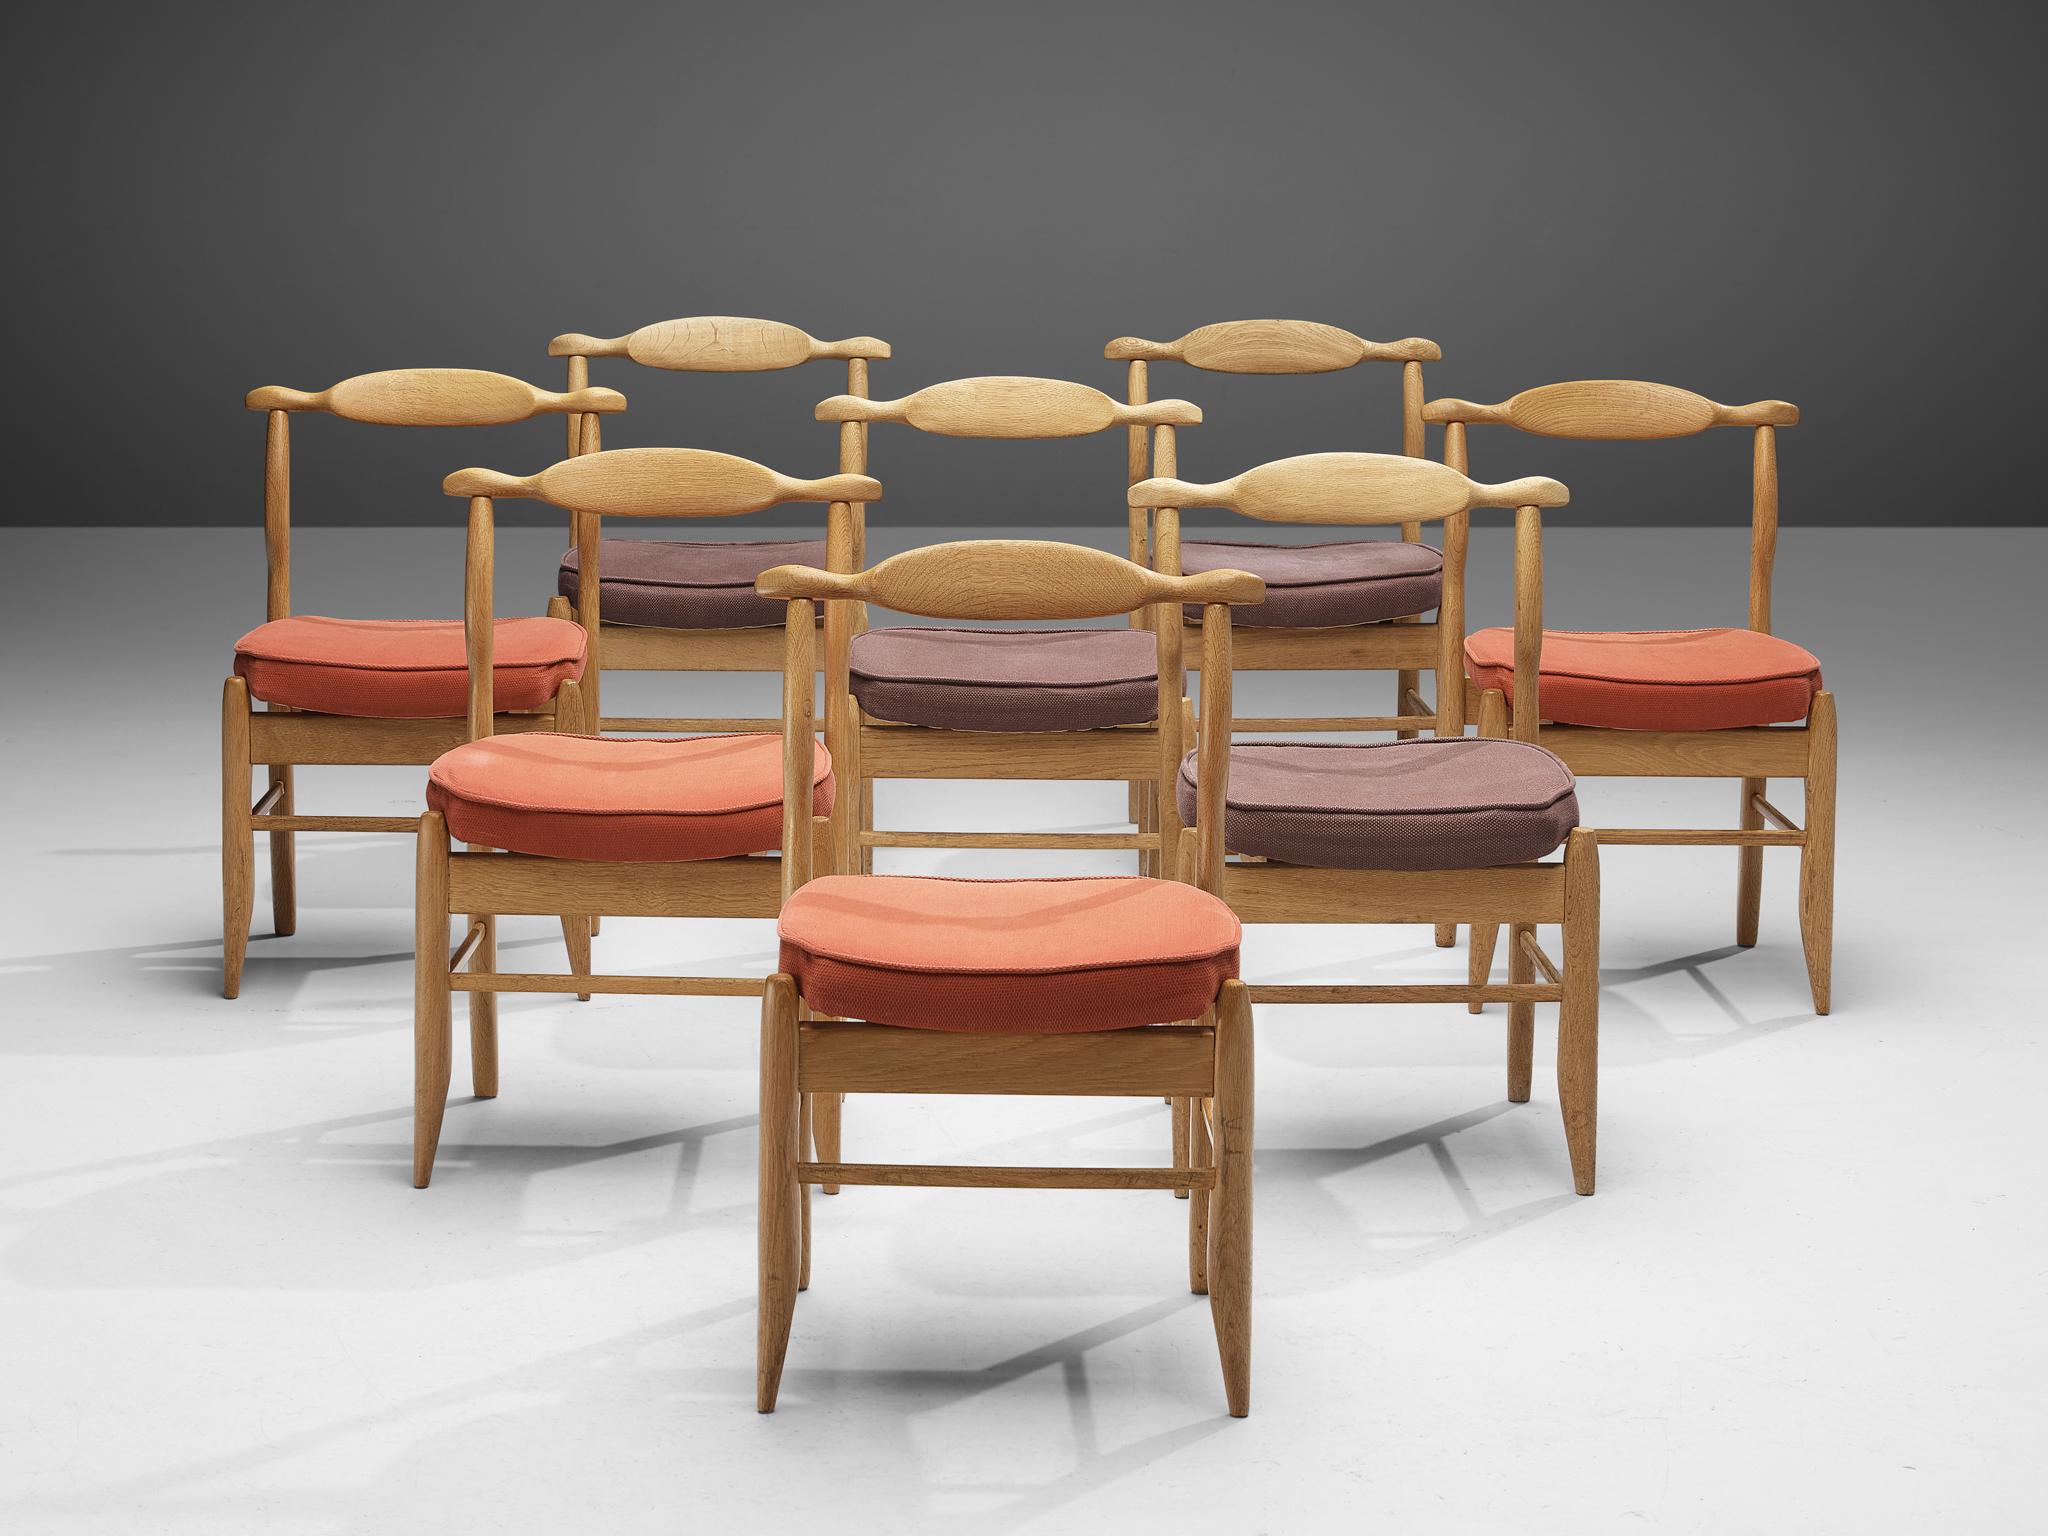 Guillerme et Chambron, set of eight dining chairs model 'Fumay', oak, fabric, France, 1960s

Beautifully shaped chairs in patinated oak by French designer duo Jacques Chambron and Robert Guillerme. These dining chairs show beautiful lines in every